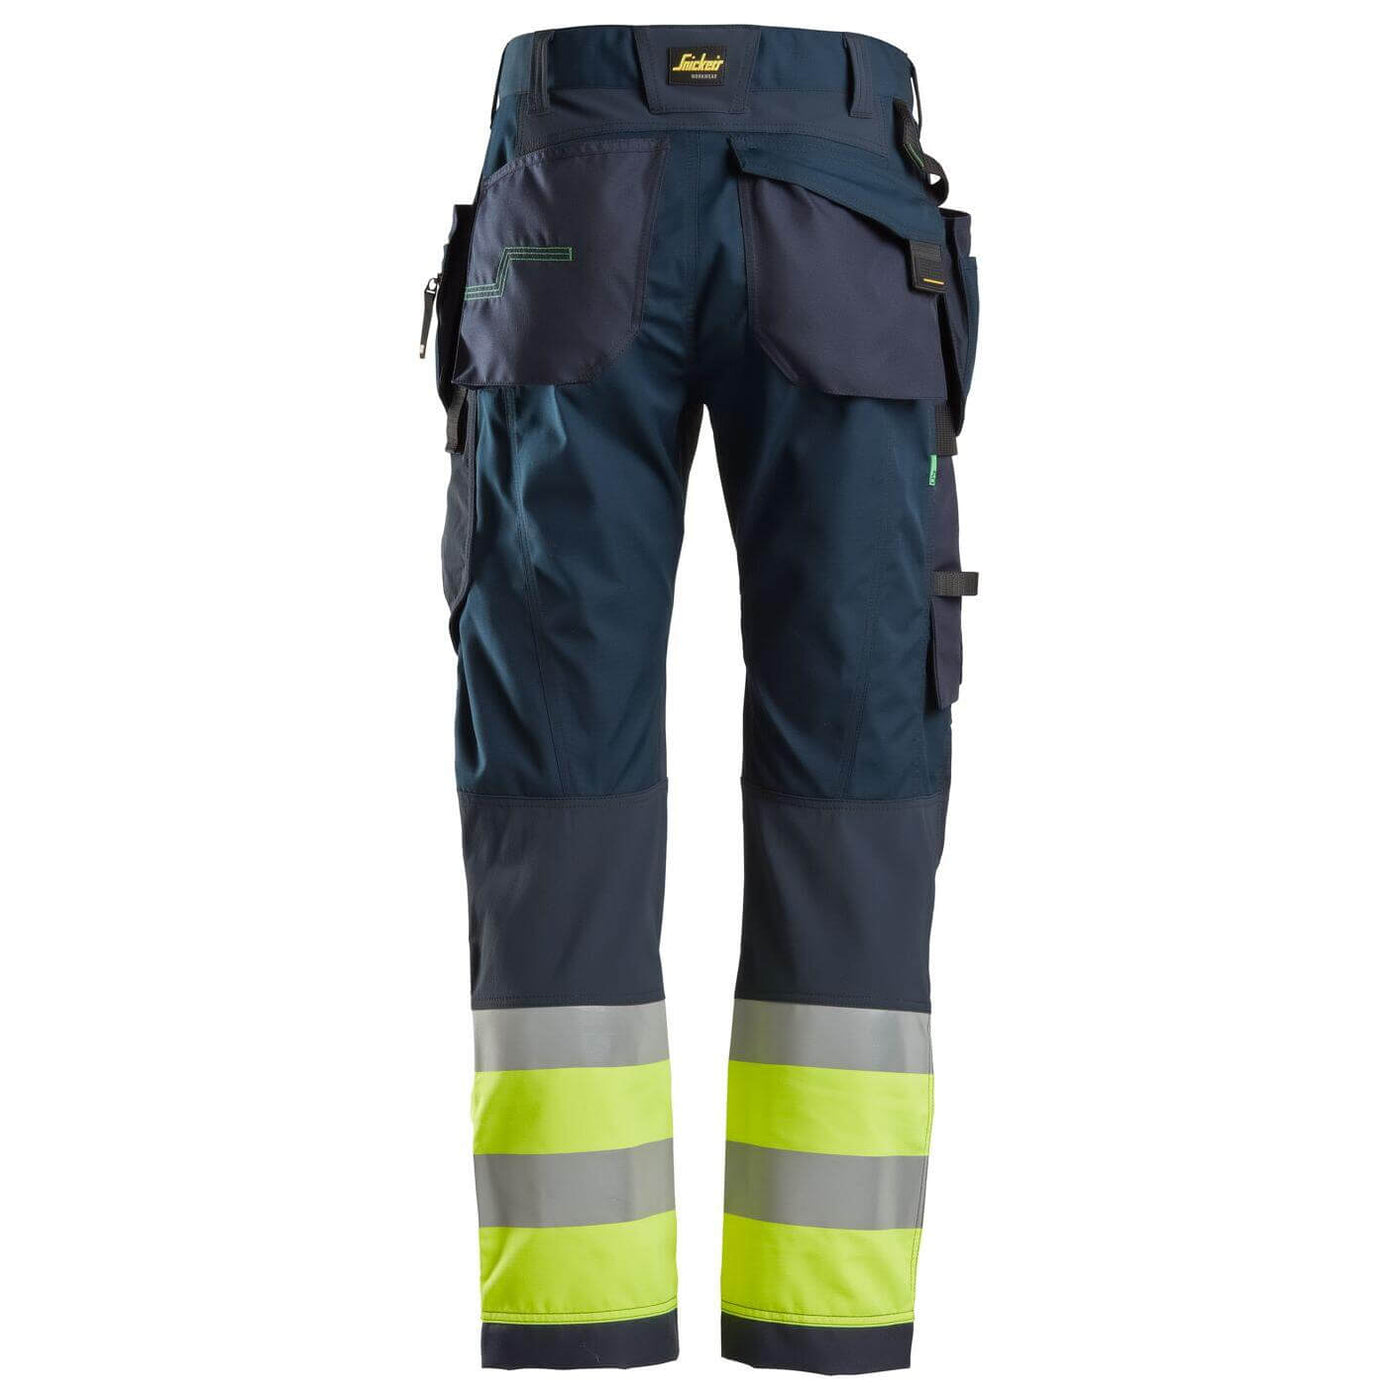 Snickers 6931 Lightweight Hi Vis Work Trousers with Holster Pockets Class 1 Navy Hi Visibilty Yellow back #colour_navy-hi-visibilty-yellow